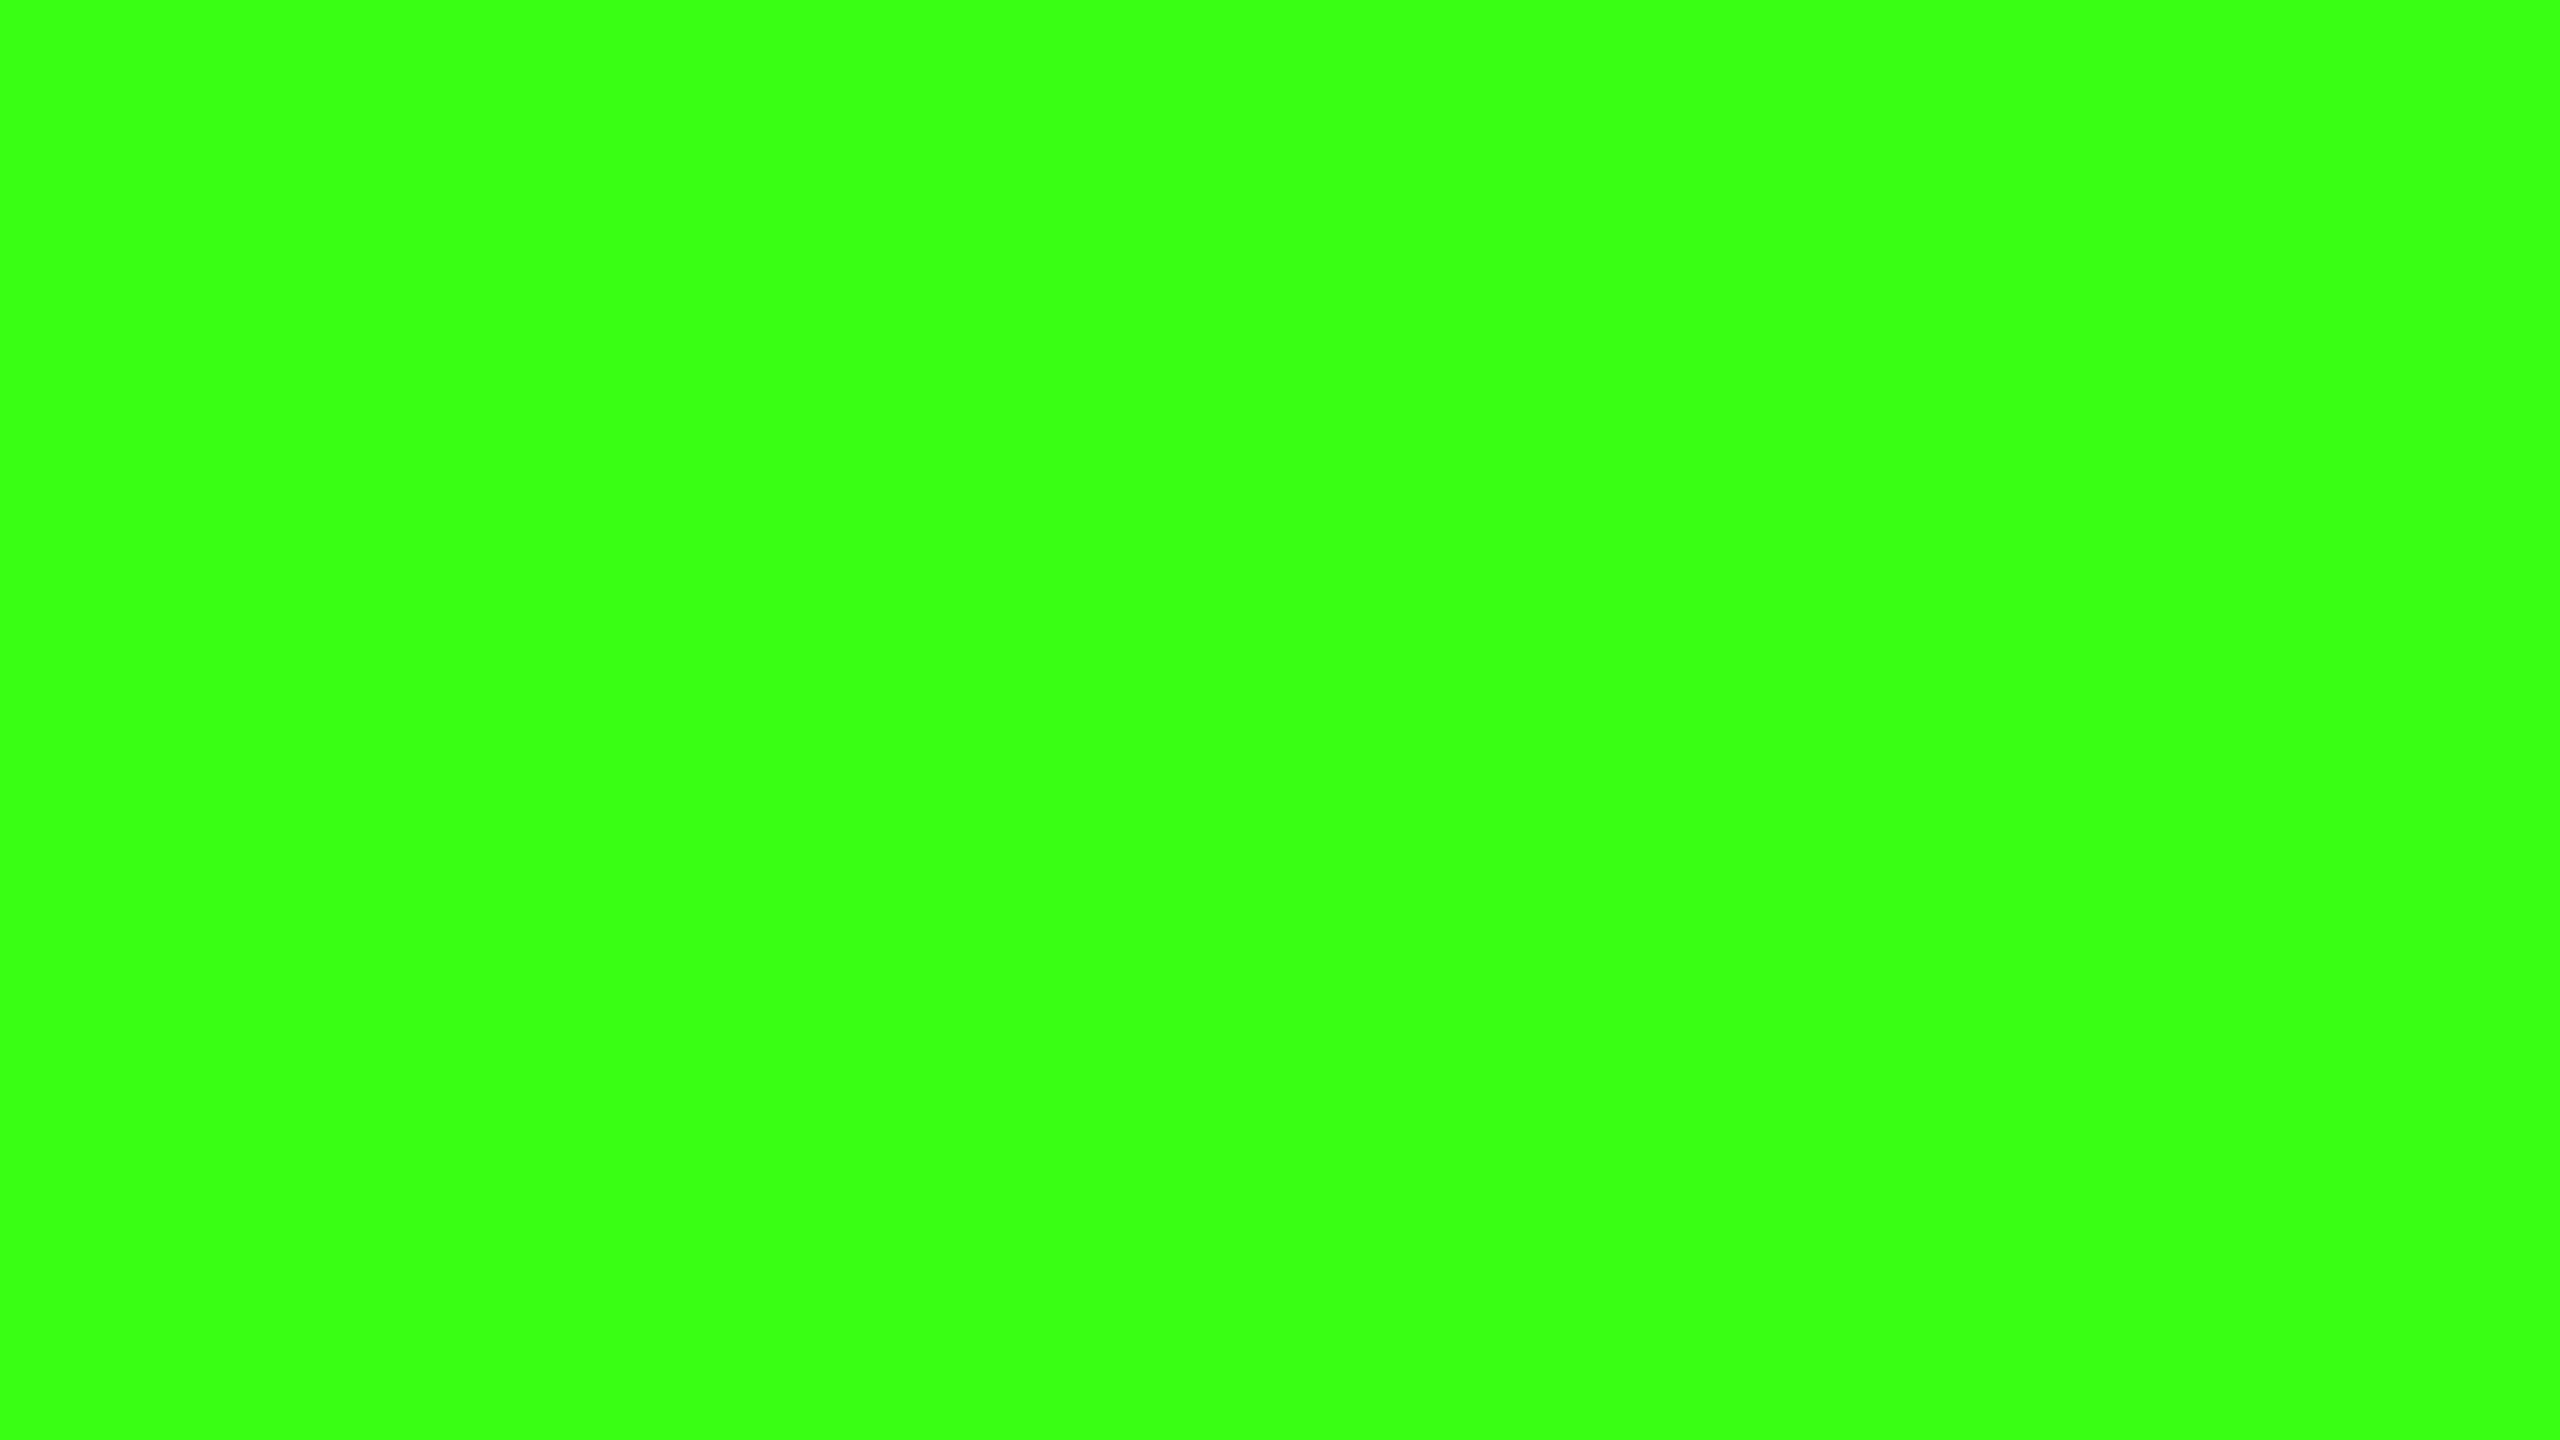 Neon Green Wallpapers - Top Free Neon Green Backgrounds